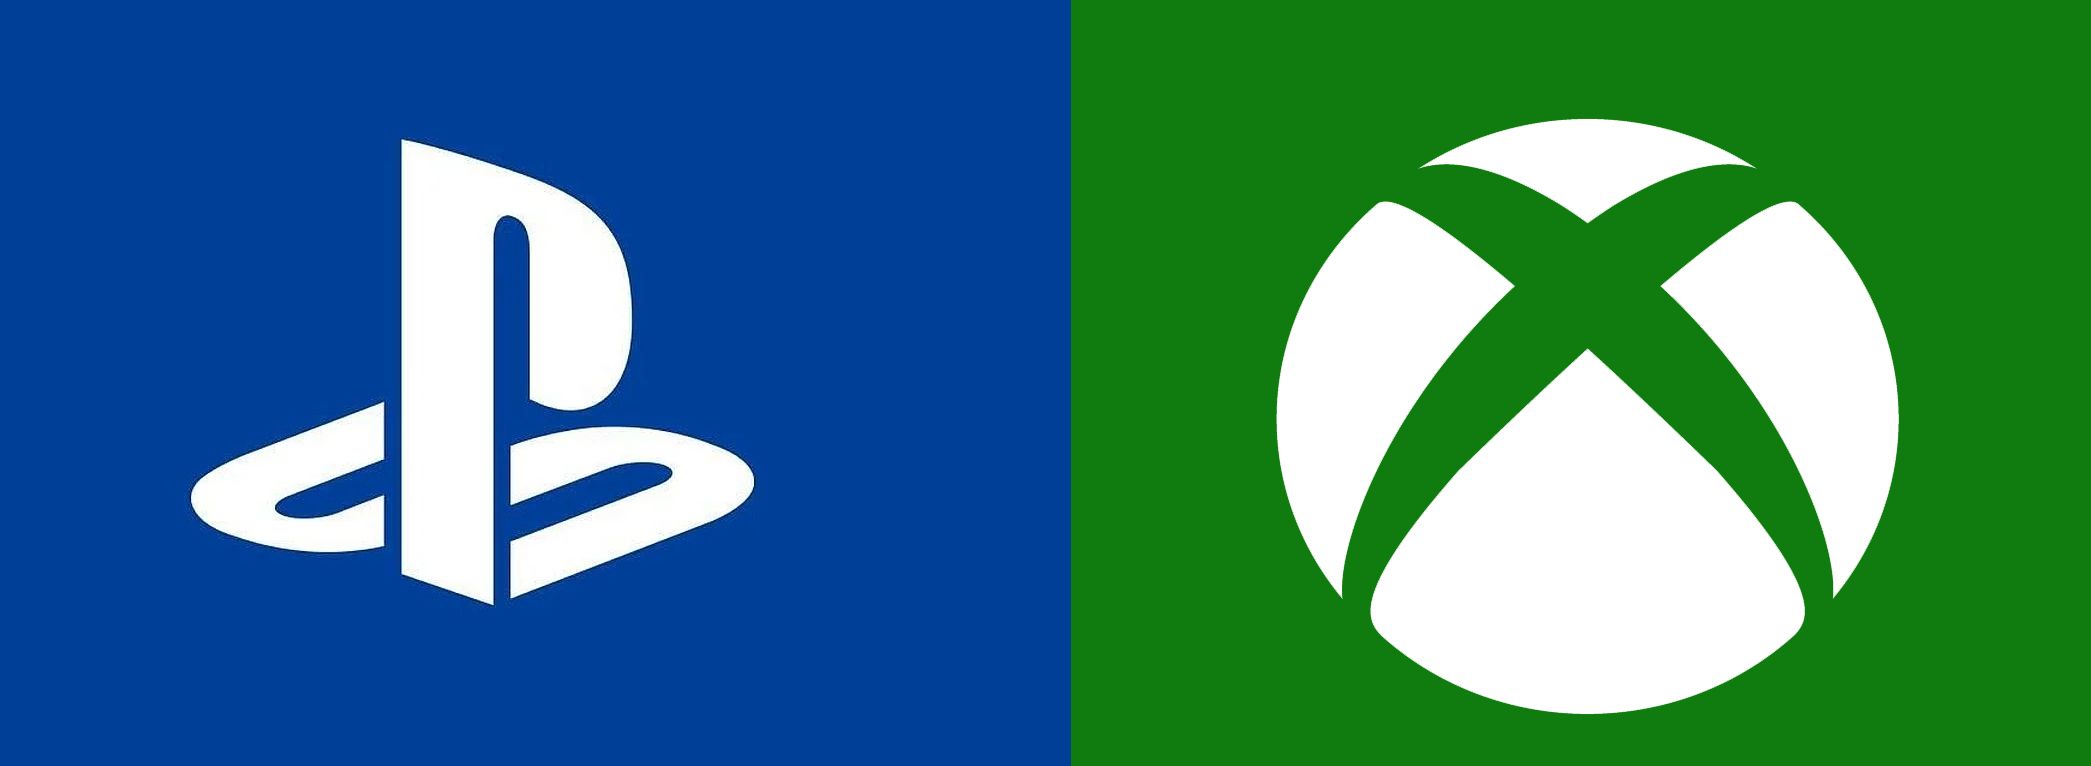 Image for Sony and Microsoft said to be working on ad placement program for console games